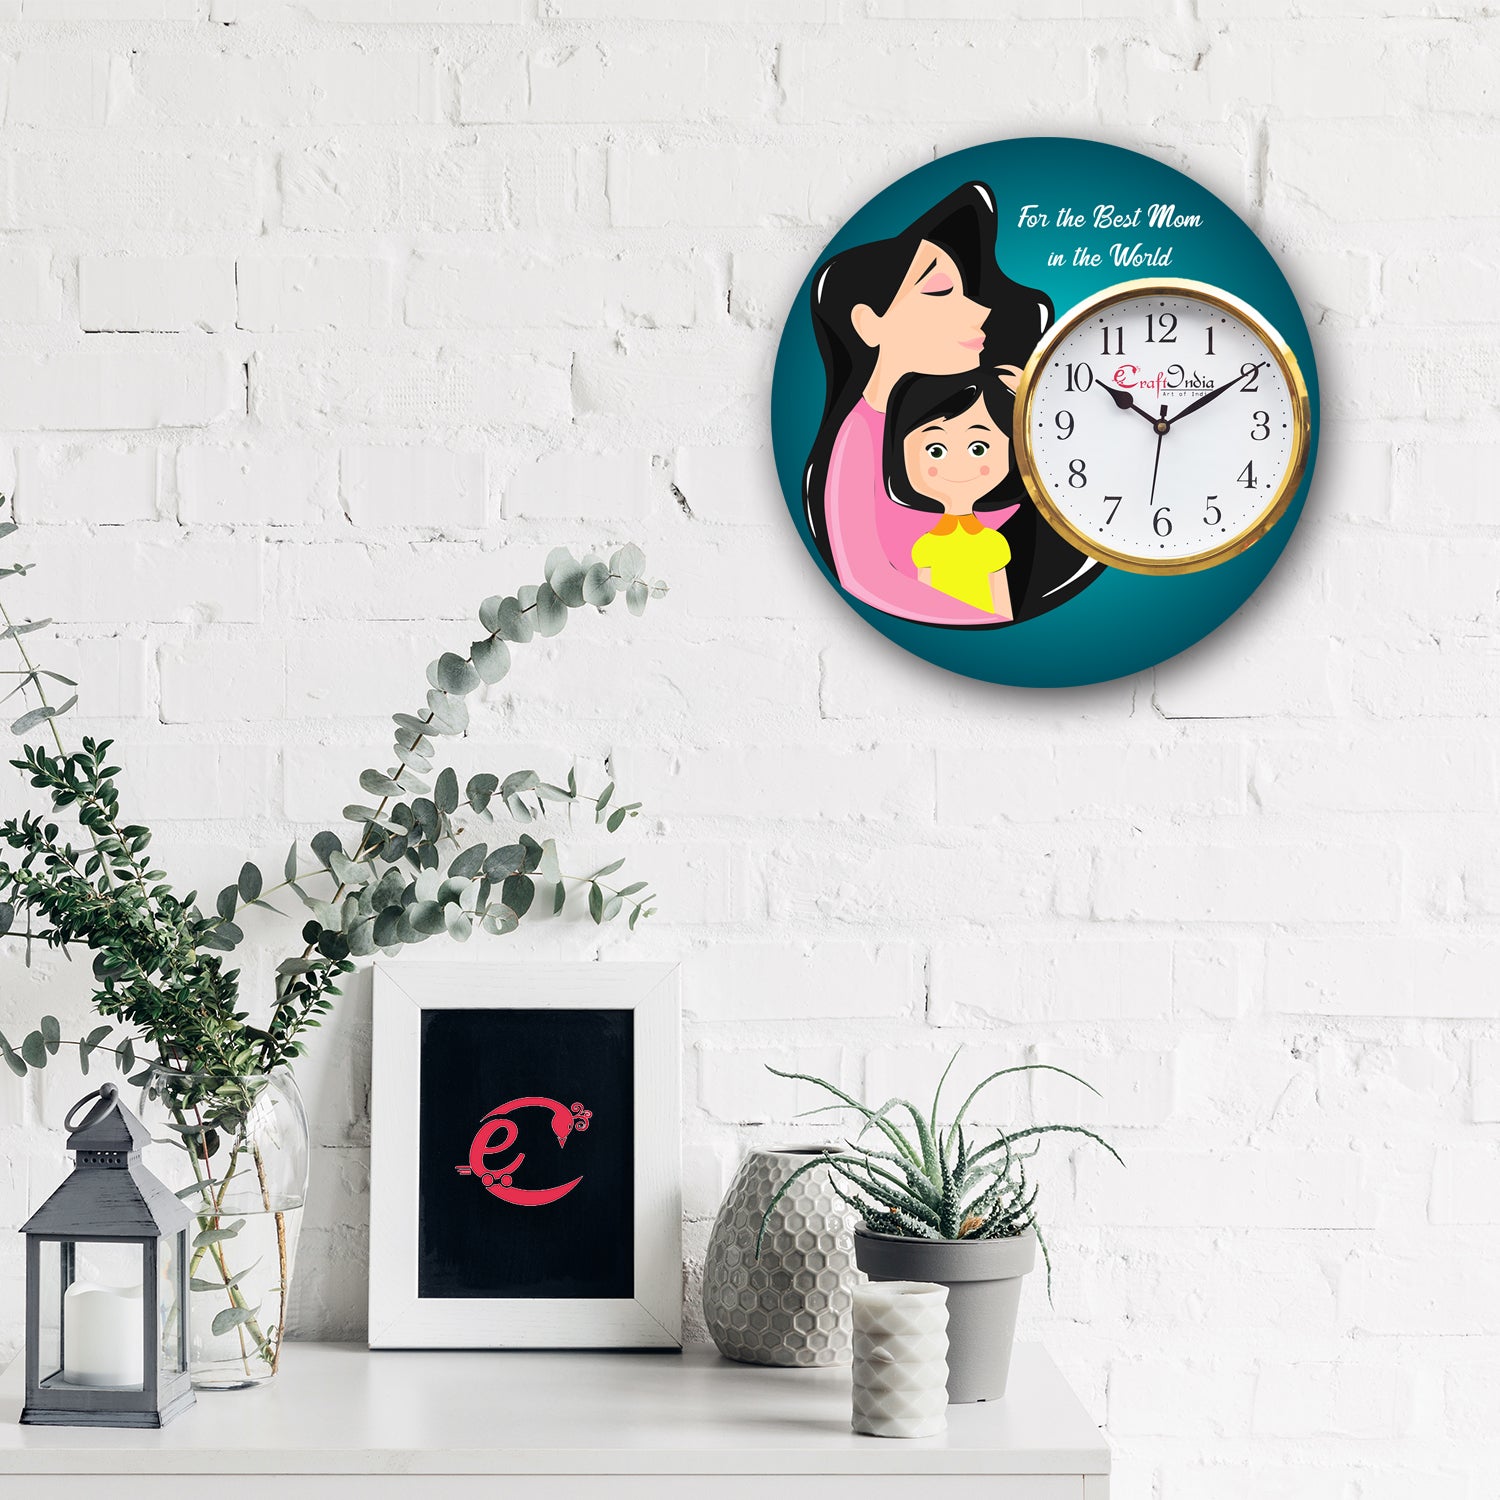 Best Mom in the World Theme Wooden Colorful Round Wall Clock 1